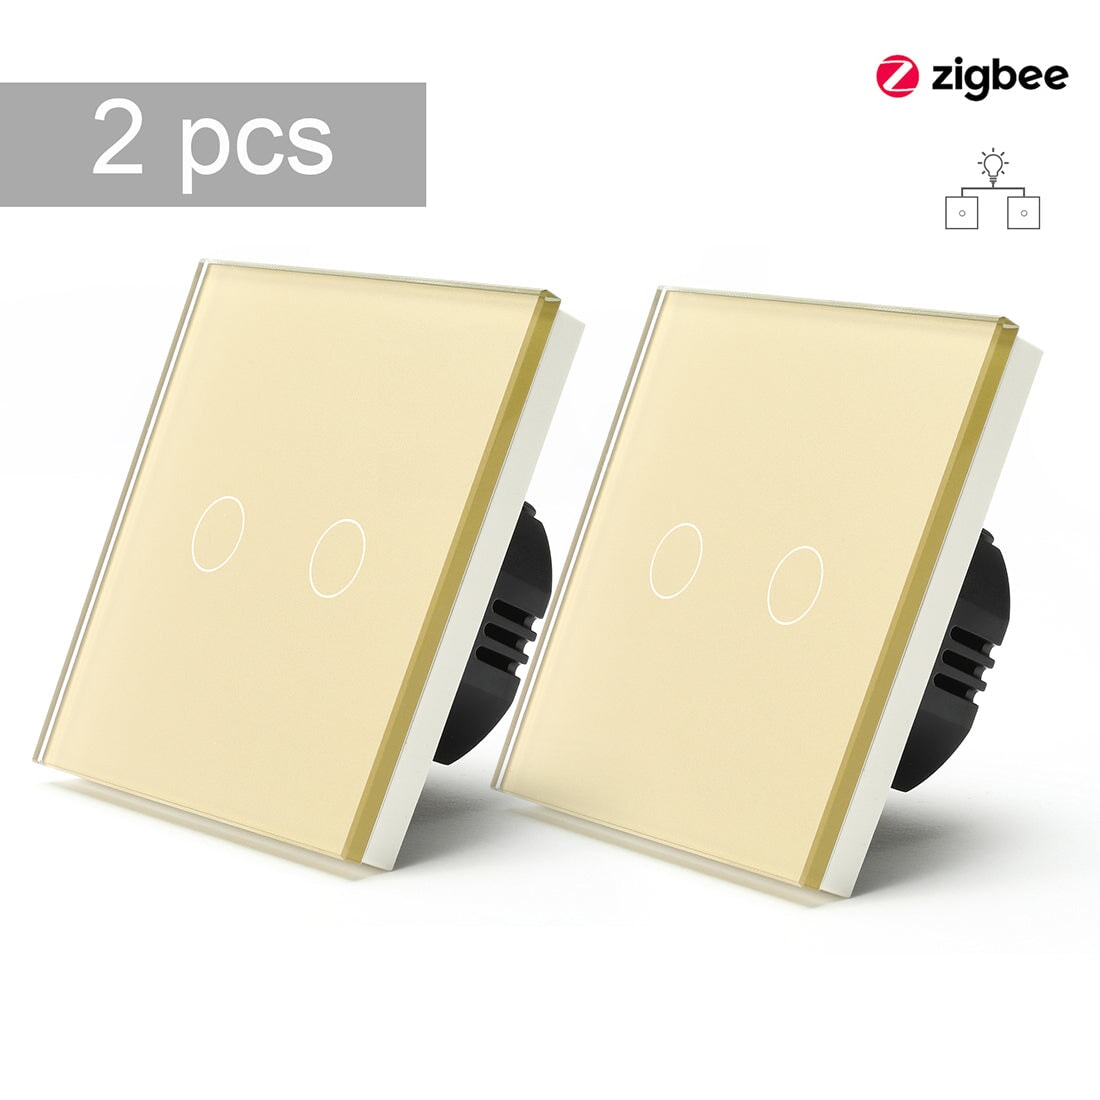 BSEED Zigbee Single Live Line Switch 1/2/3 Gang 1/2/3 Way Wall Smart Light Switch Single Live Line 1/2/3 pack Light Switches Bseedswitch Golden 2Gang 2 Pcs/Pack